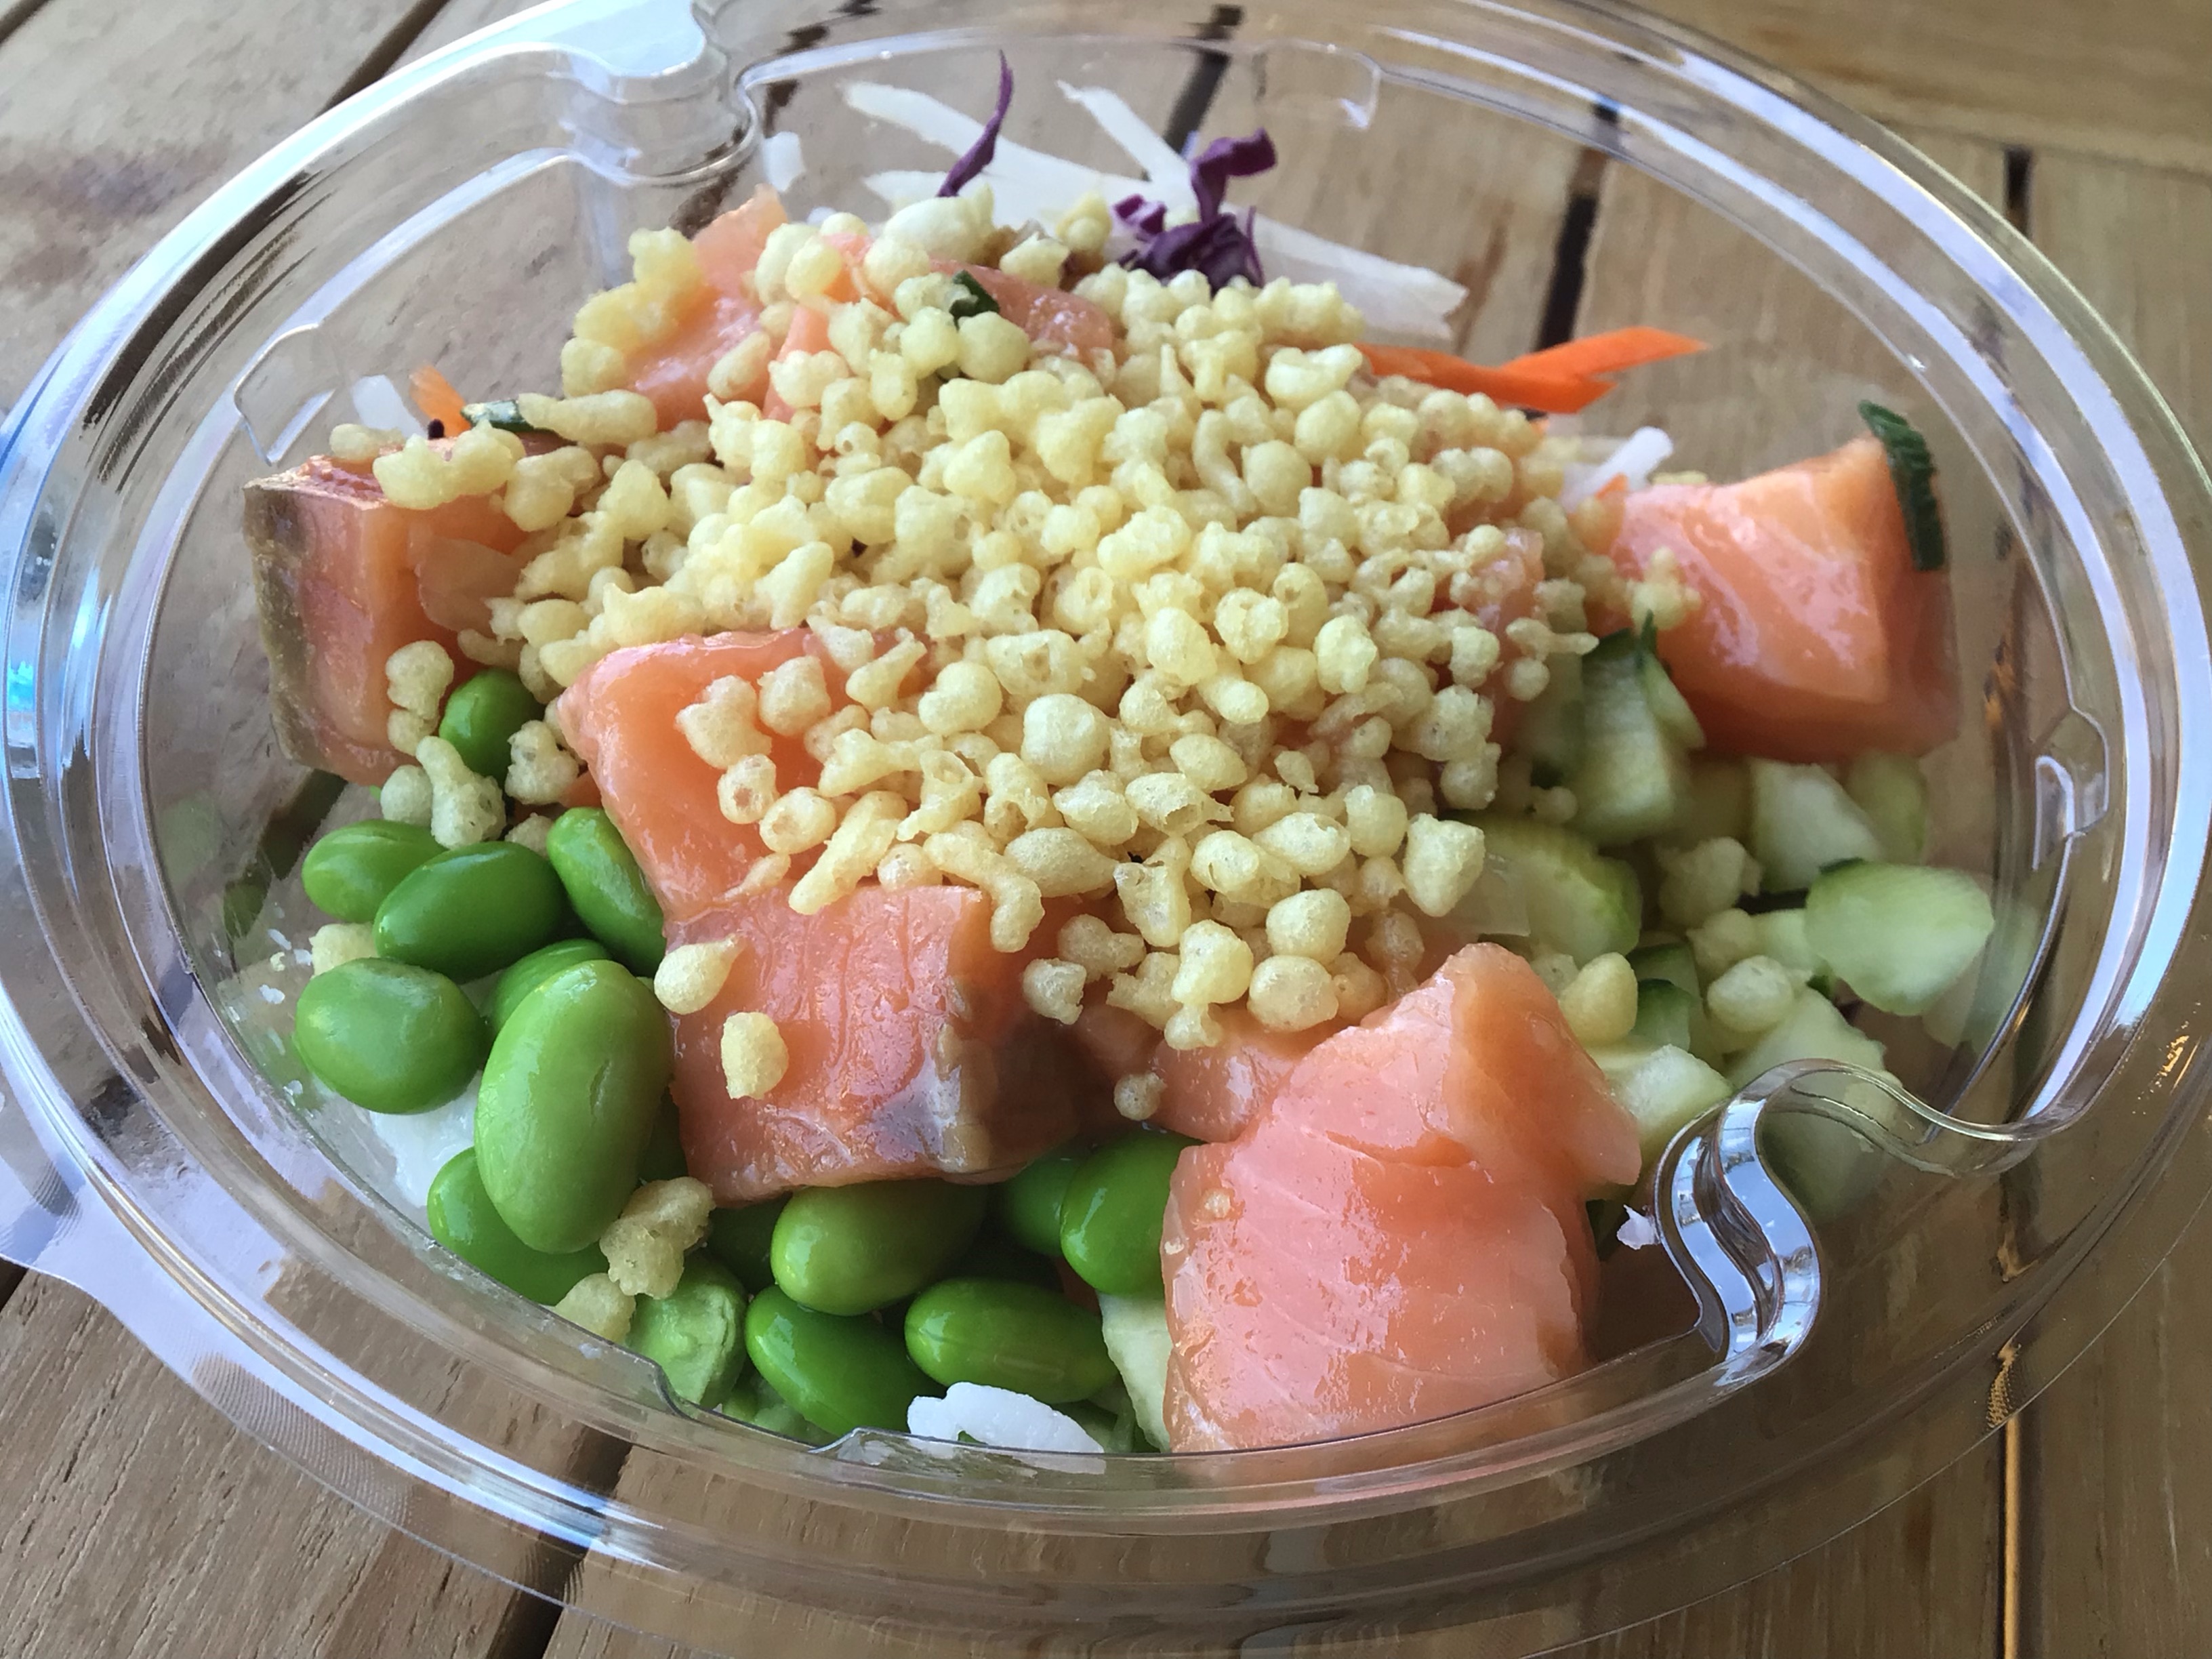 A clear plastic to-go container holds a salmon poke bowl: white sushi rice is topped with bright green edamame, shiny chunks of salmon poke, shredded cabbage and carrots, and small chunks of cucumber. The optional tempura crunch topping resembles rice cereal. Photo by Rachael McMillan.